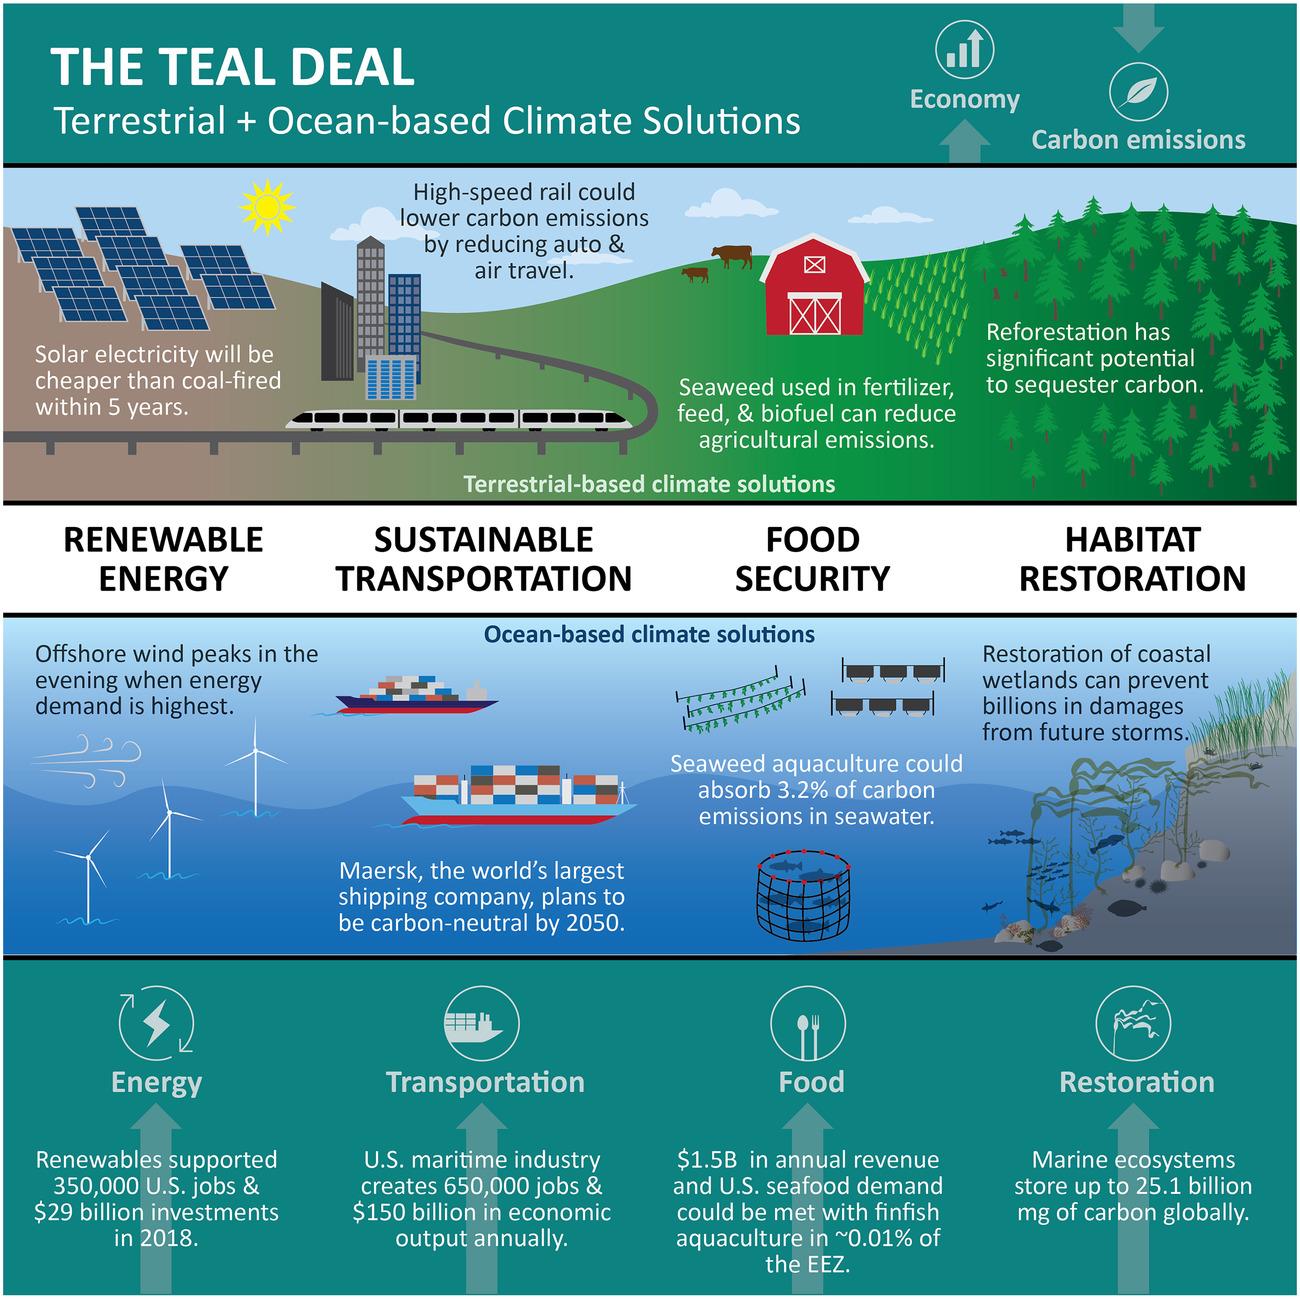 The Teal Deal: Integrating Oceans into Terrestrial Climate Solutions.